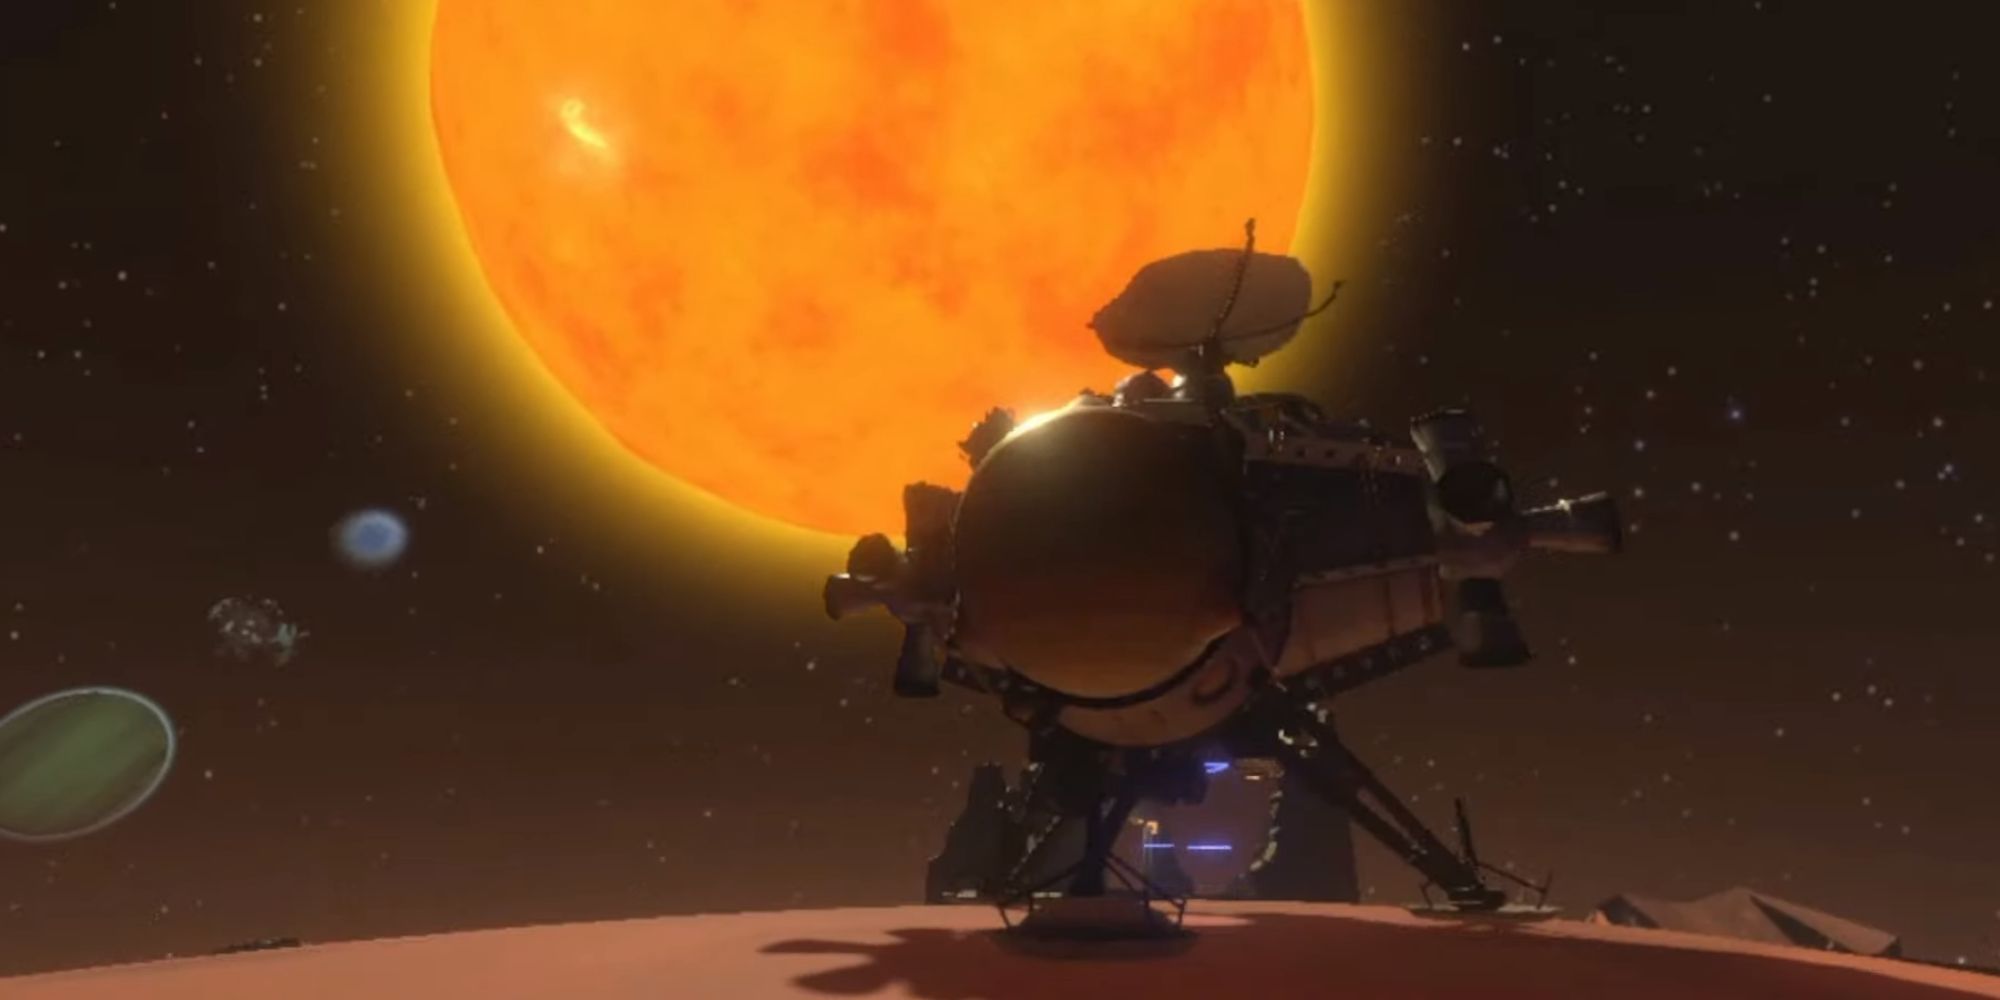 A space ship landed on a planets surface in Outer Wilds. The huge sun can be seen in the background